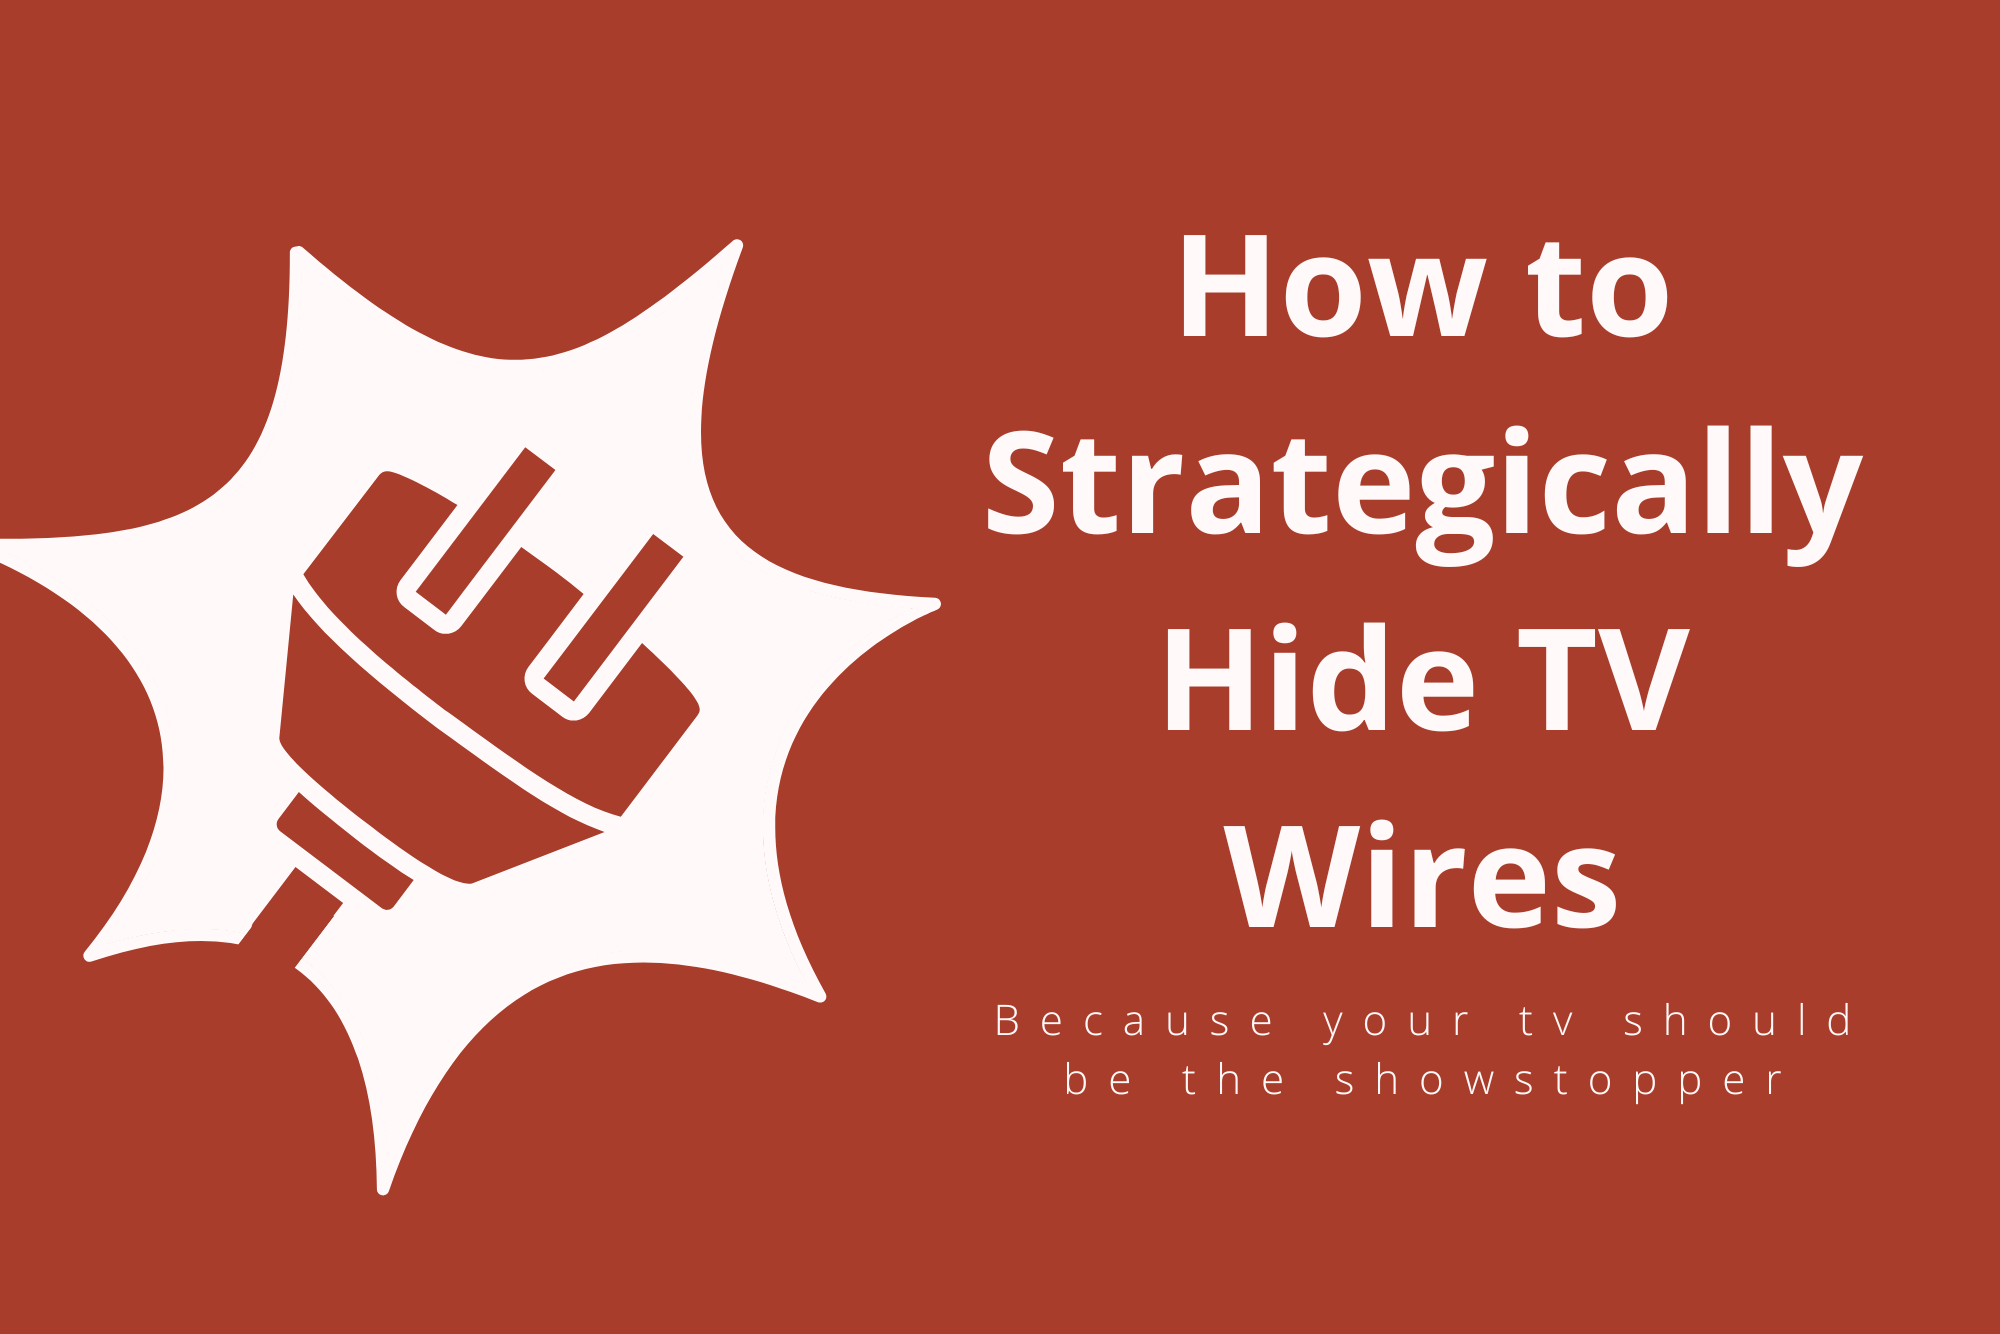 A Step-by-Step Guide to Hide Wires from Your TV